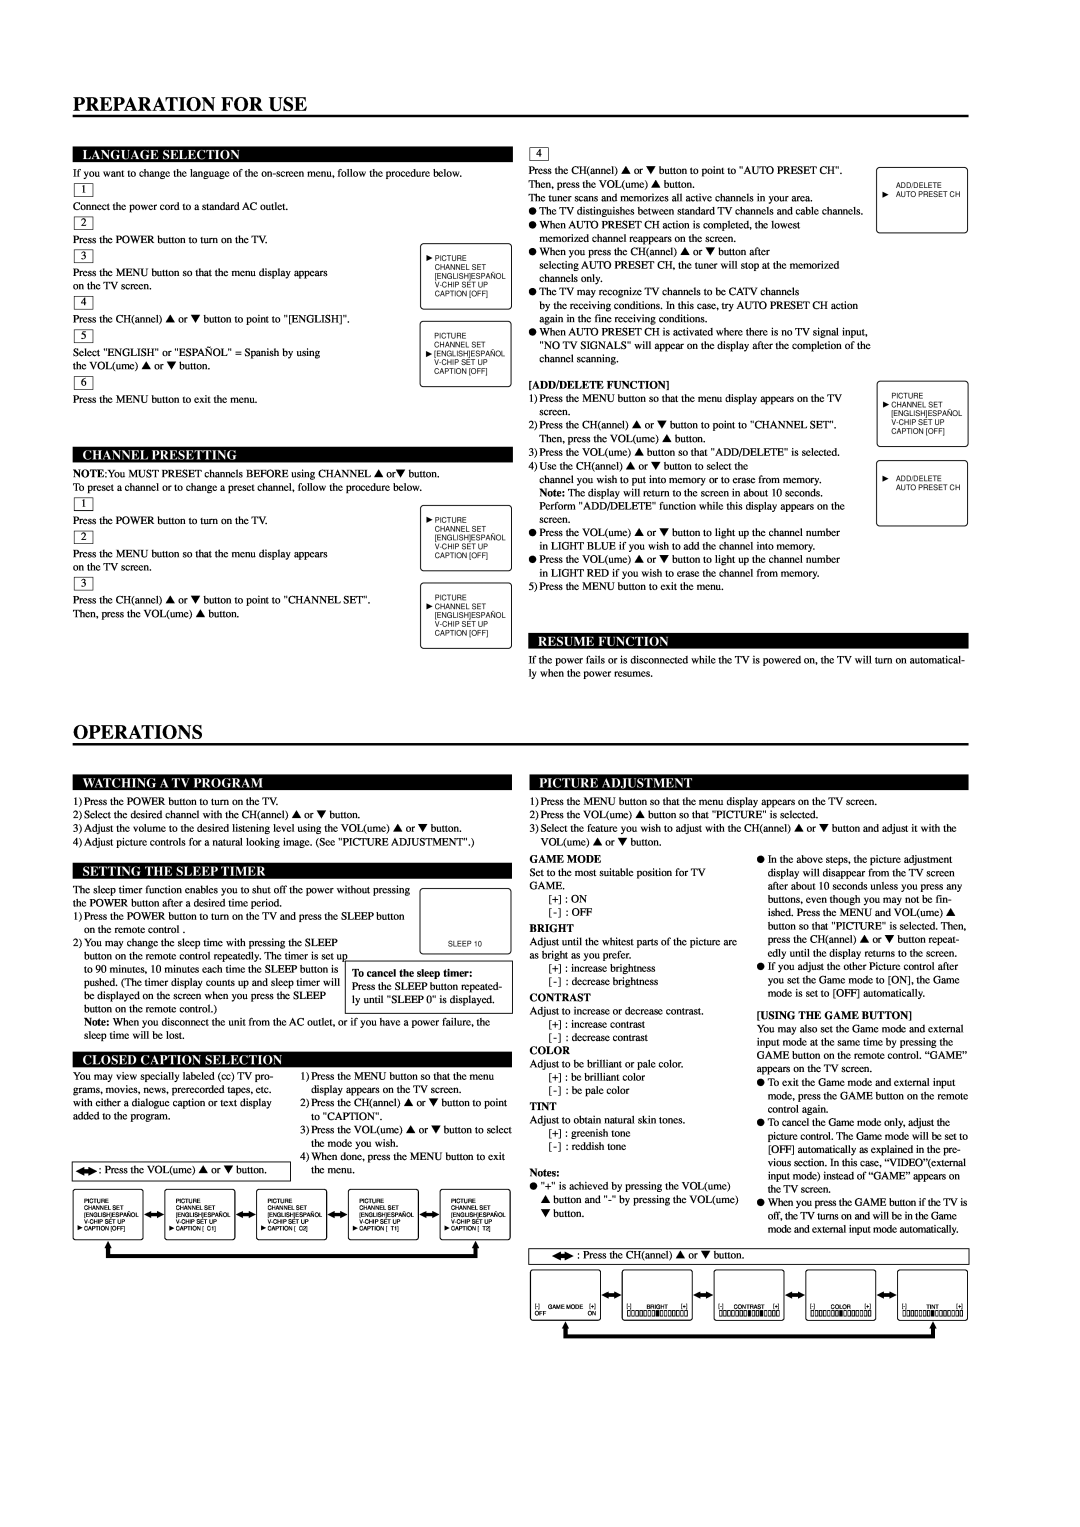 Symphonic 6413TE, 6419TE Preparation For Use, Operations, Language Selection, Channel Presetting, Resume Function, Bright 